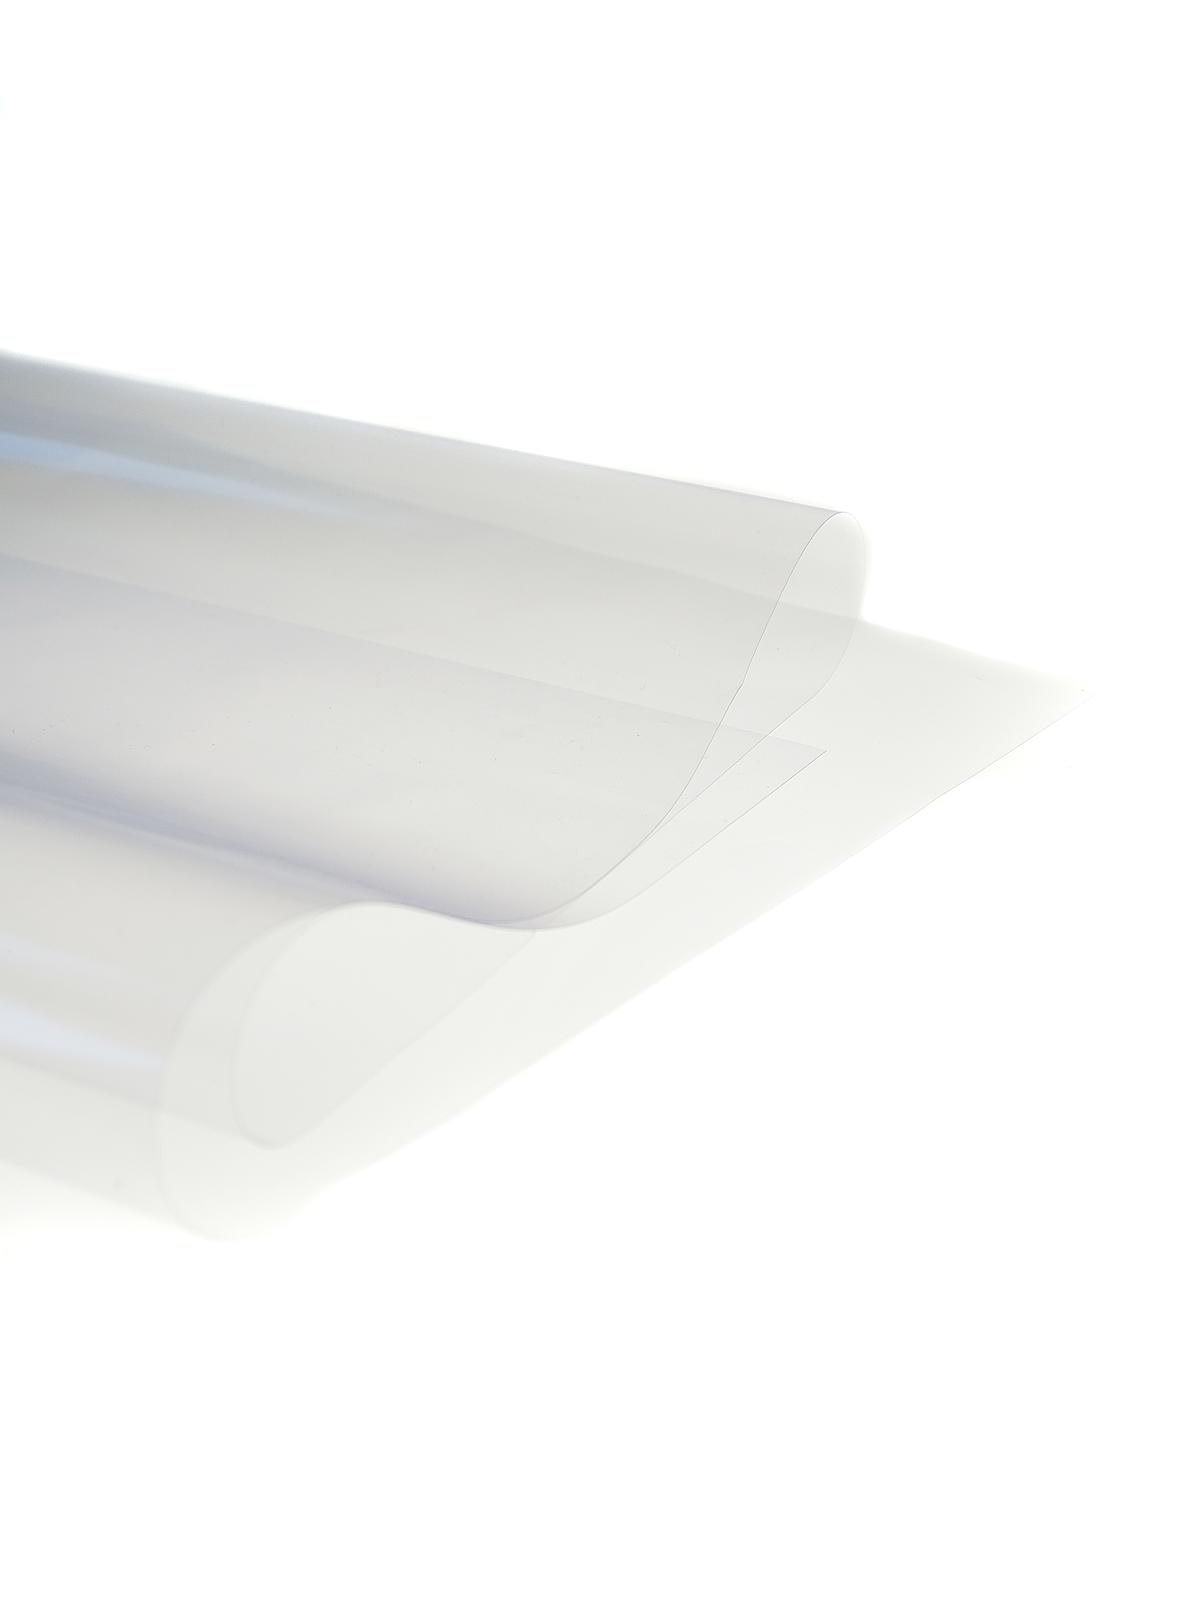 Clear-lay Plastic Film 0.007 20 In. X 50 In. Sheet